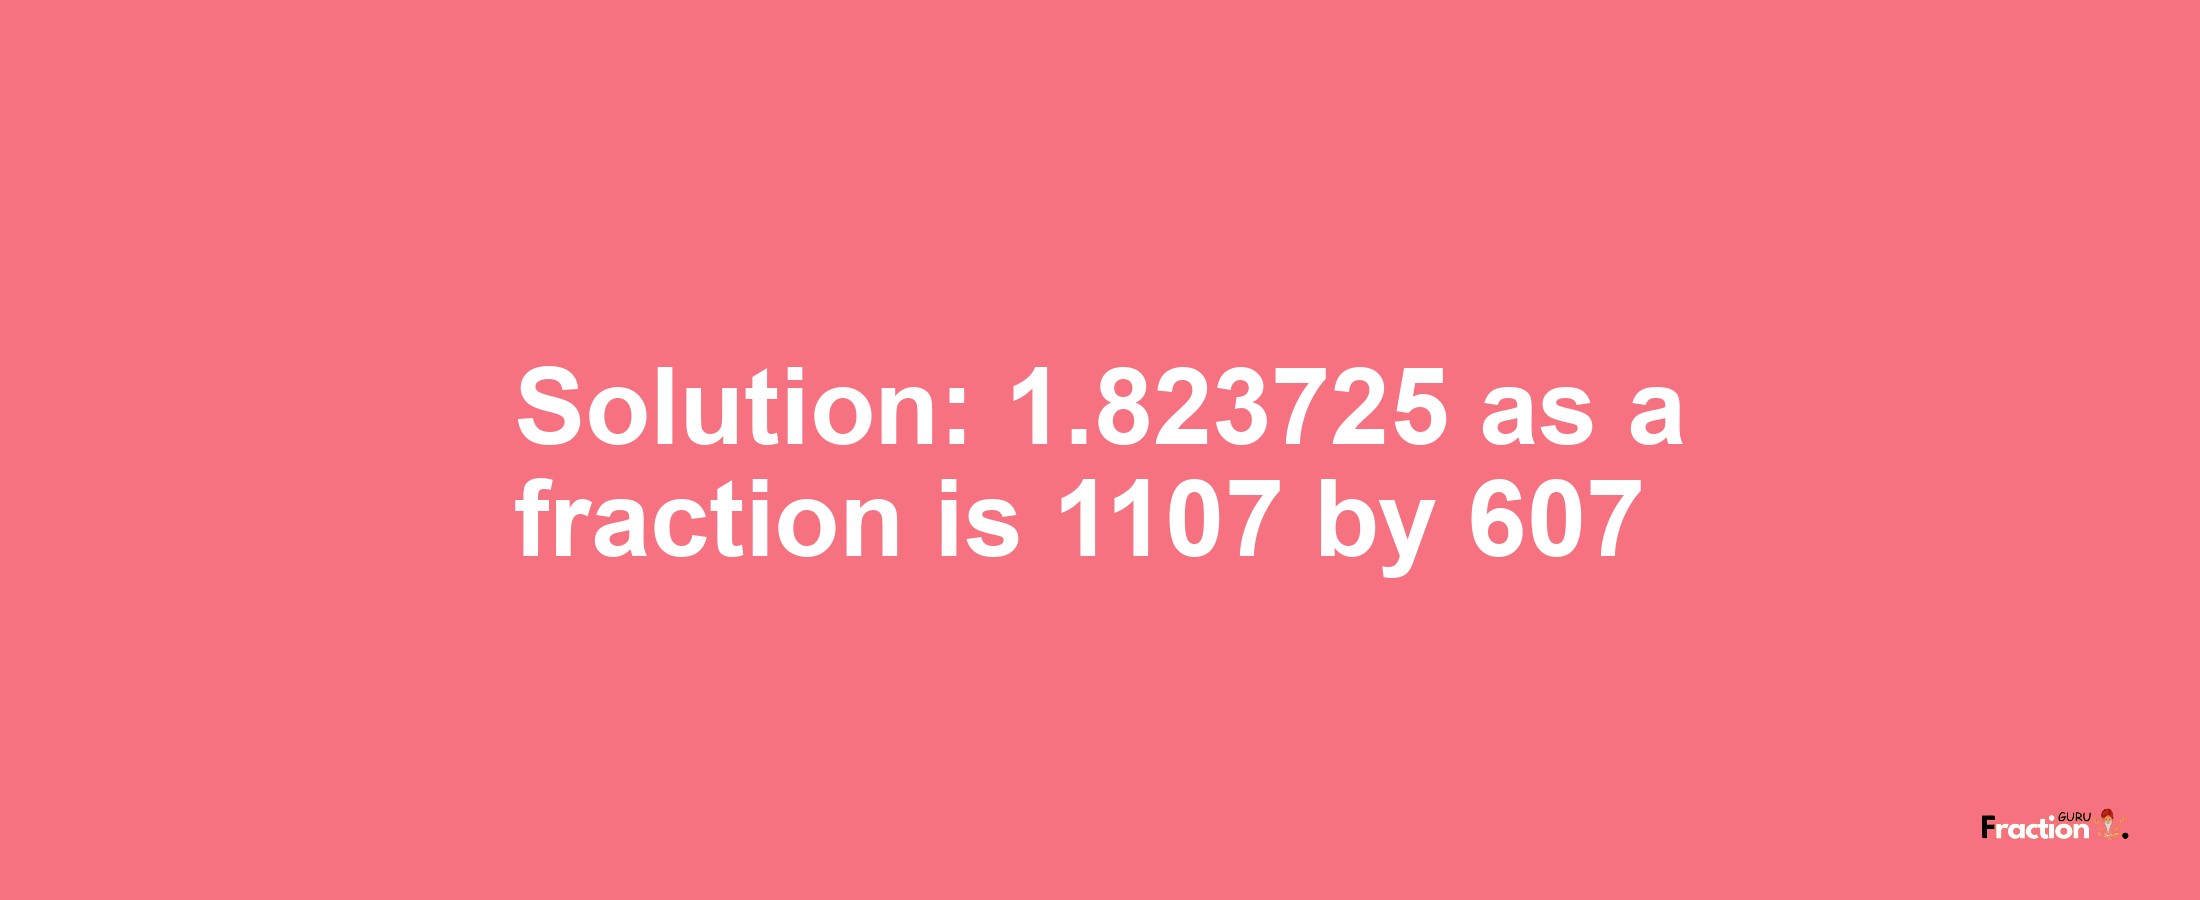 Solution:1.823725 as a fraction is 1107/607